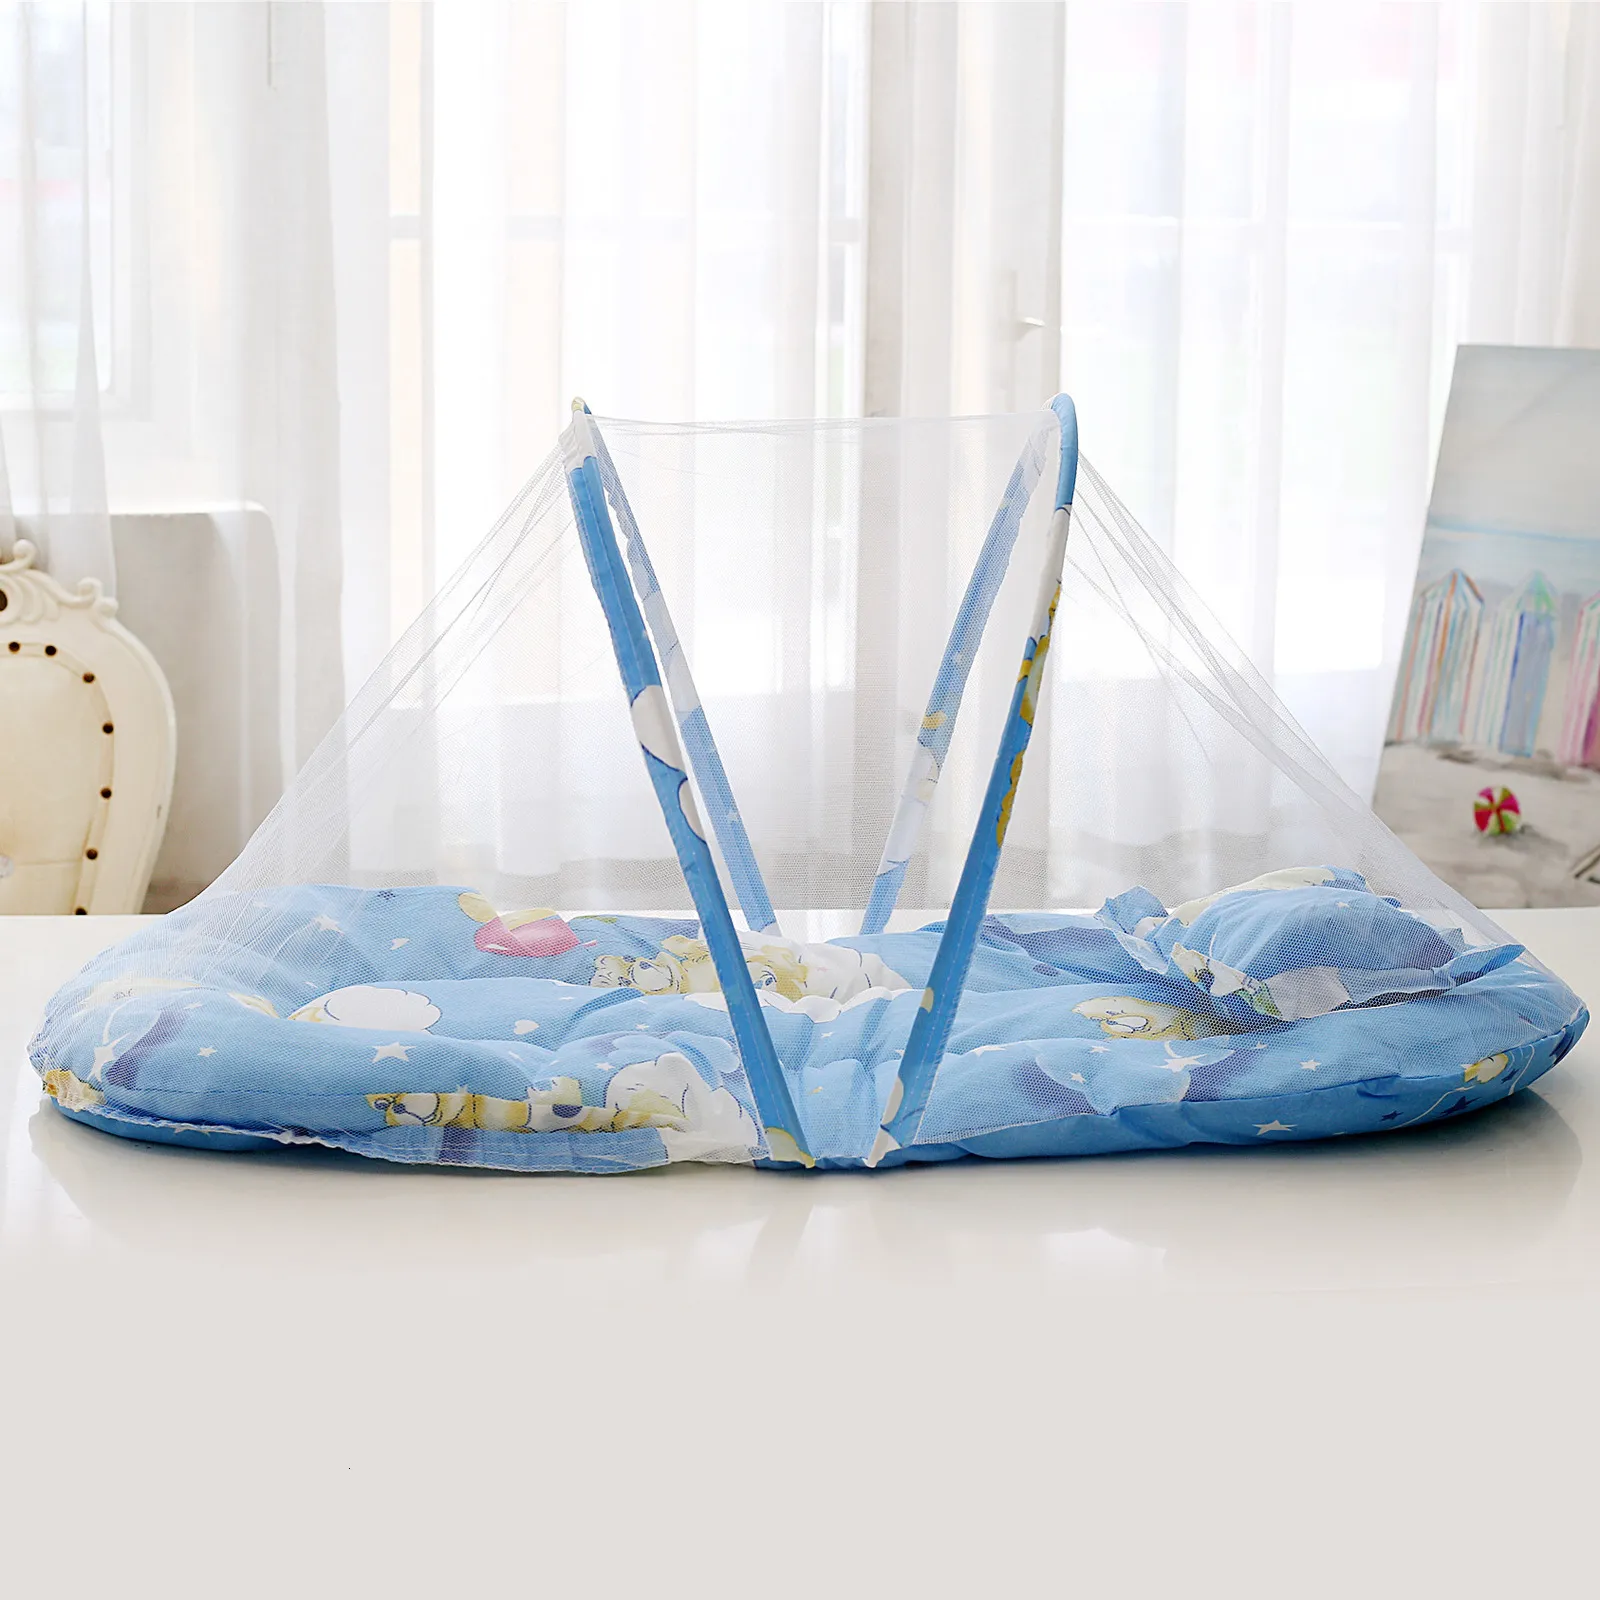 Portable Foldable Travel Cot Mosquito Net For Baby Crib Polyester Summer  Travel Play Tent And Childrens Bedding From Youngstore07, $11.52